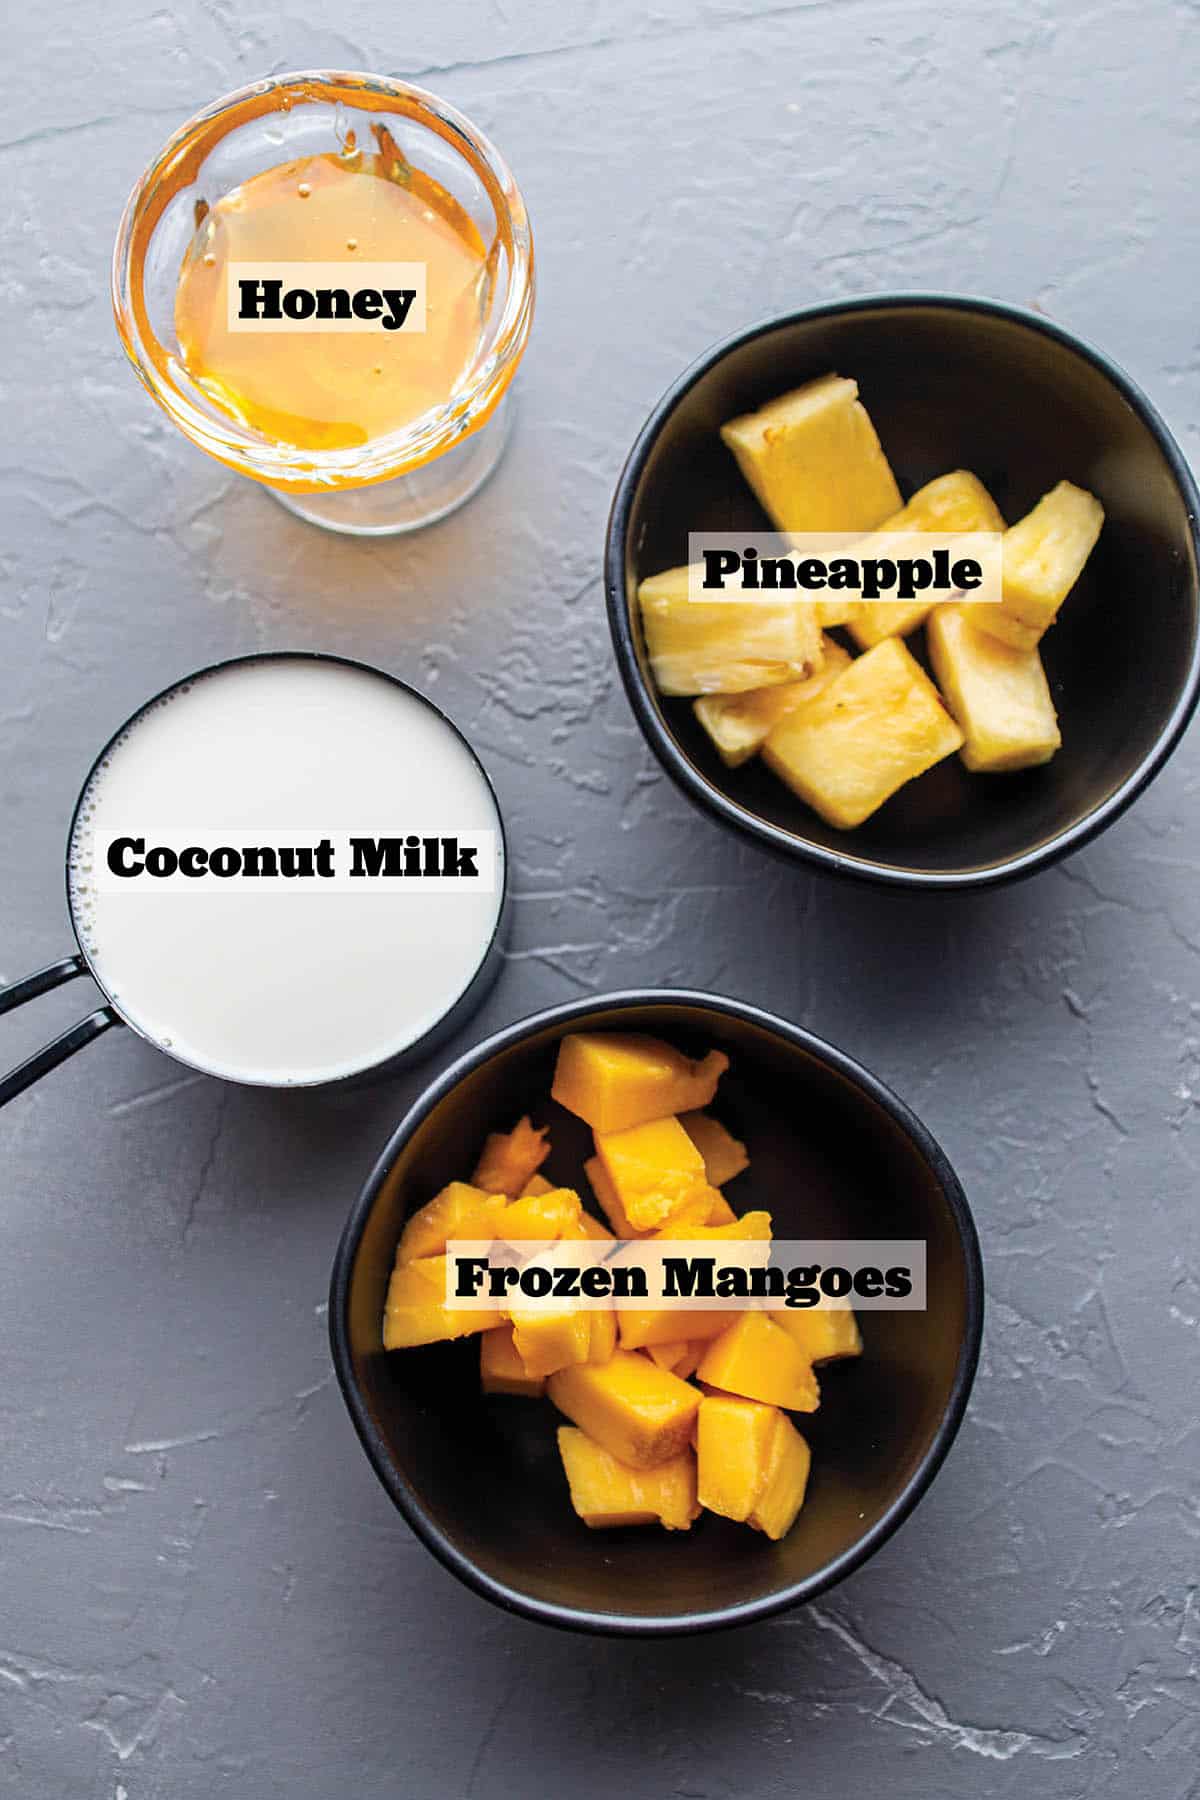 Black bowls with frozen mangoes, pineapple, coconut milk and honey.
